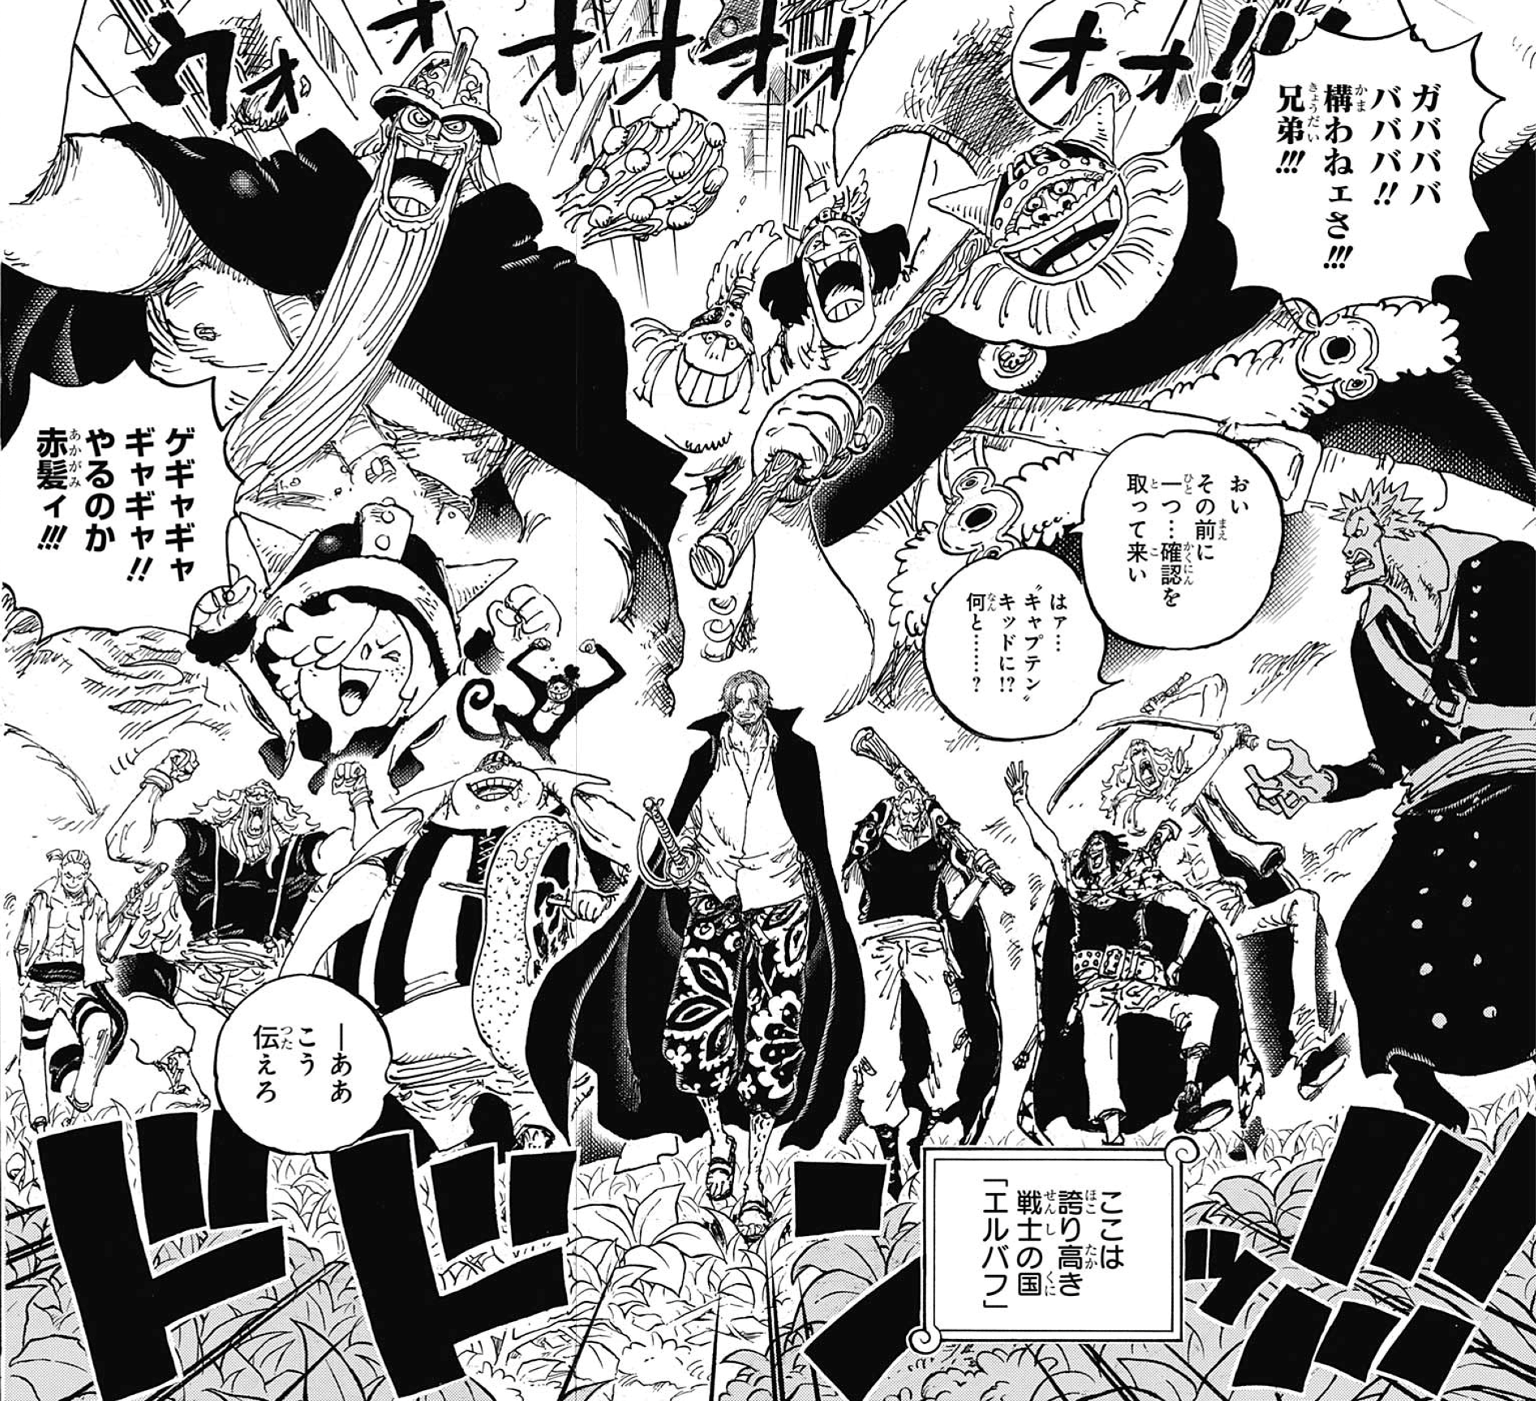 One Piece Chapter 1058 Spoilers: Sanji and Jinbe's reaction to their new  bounty